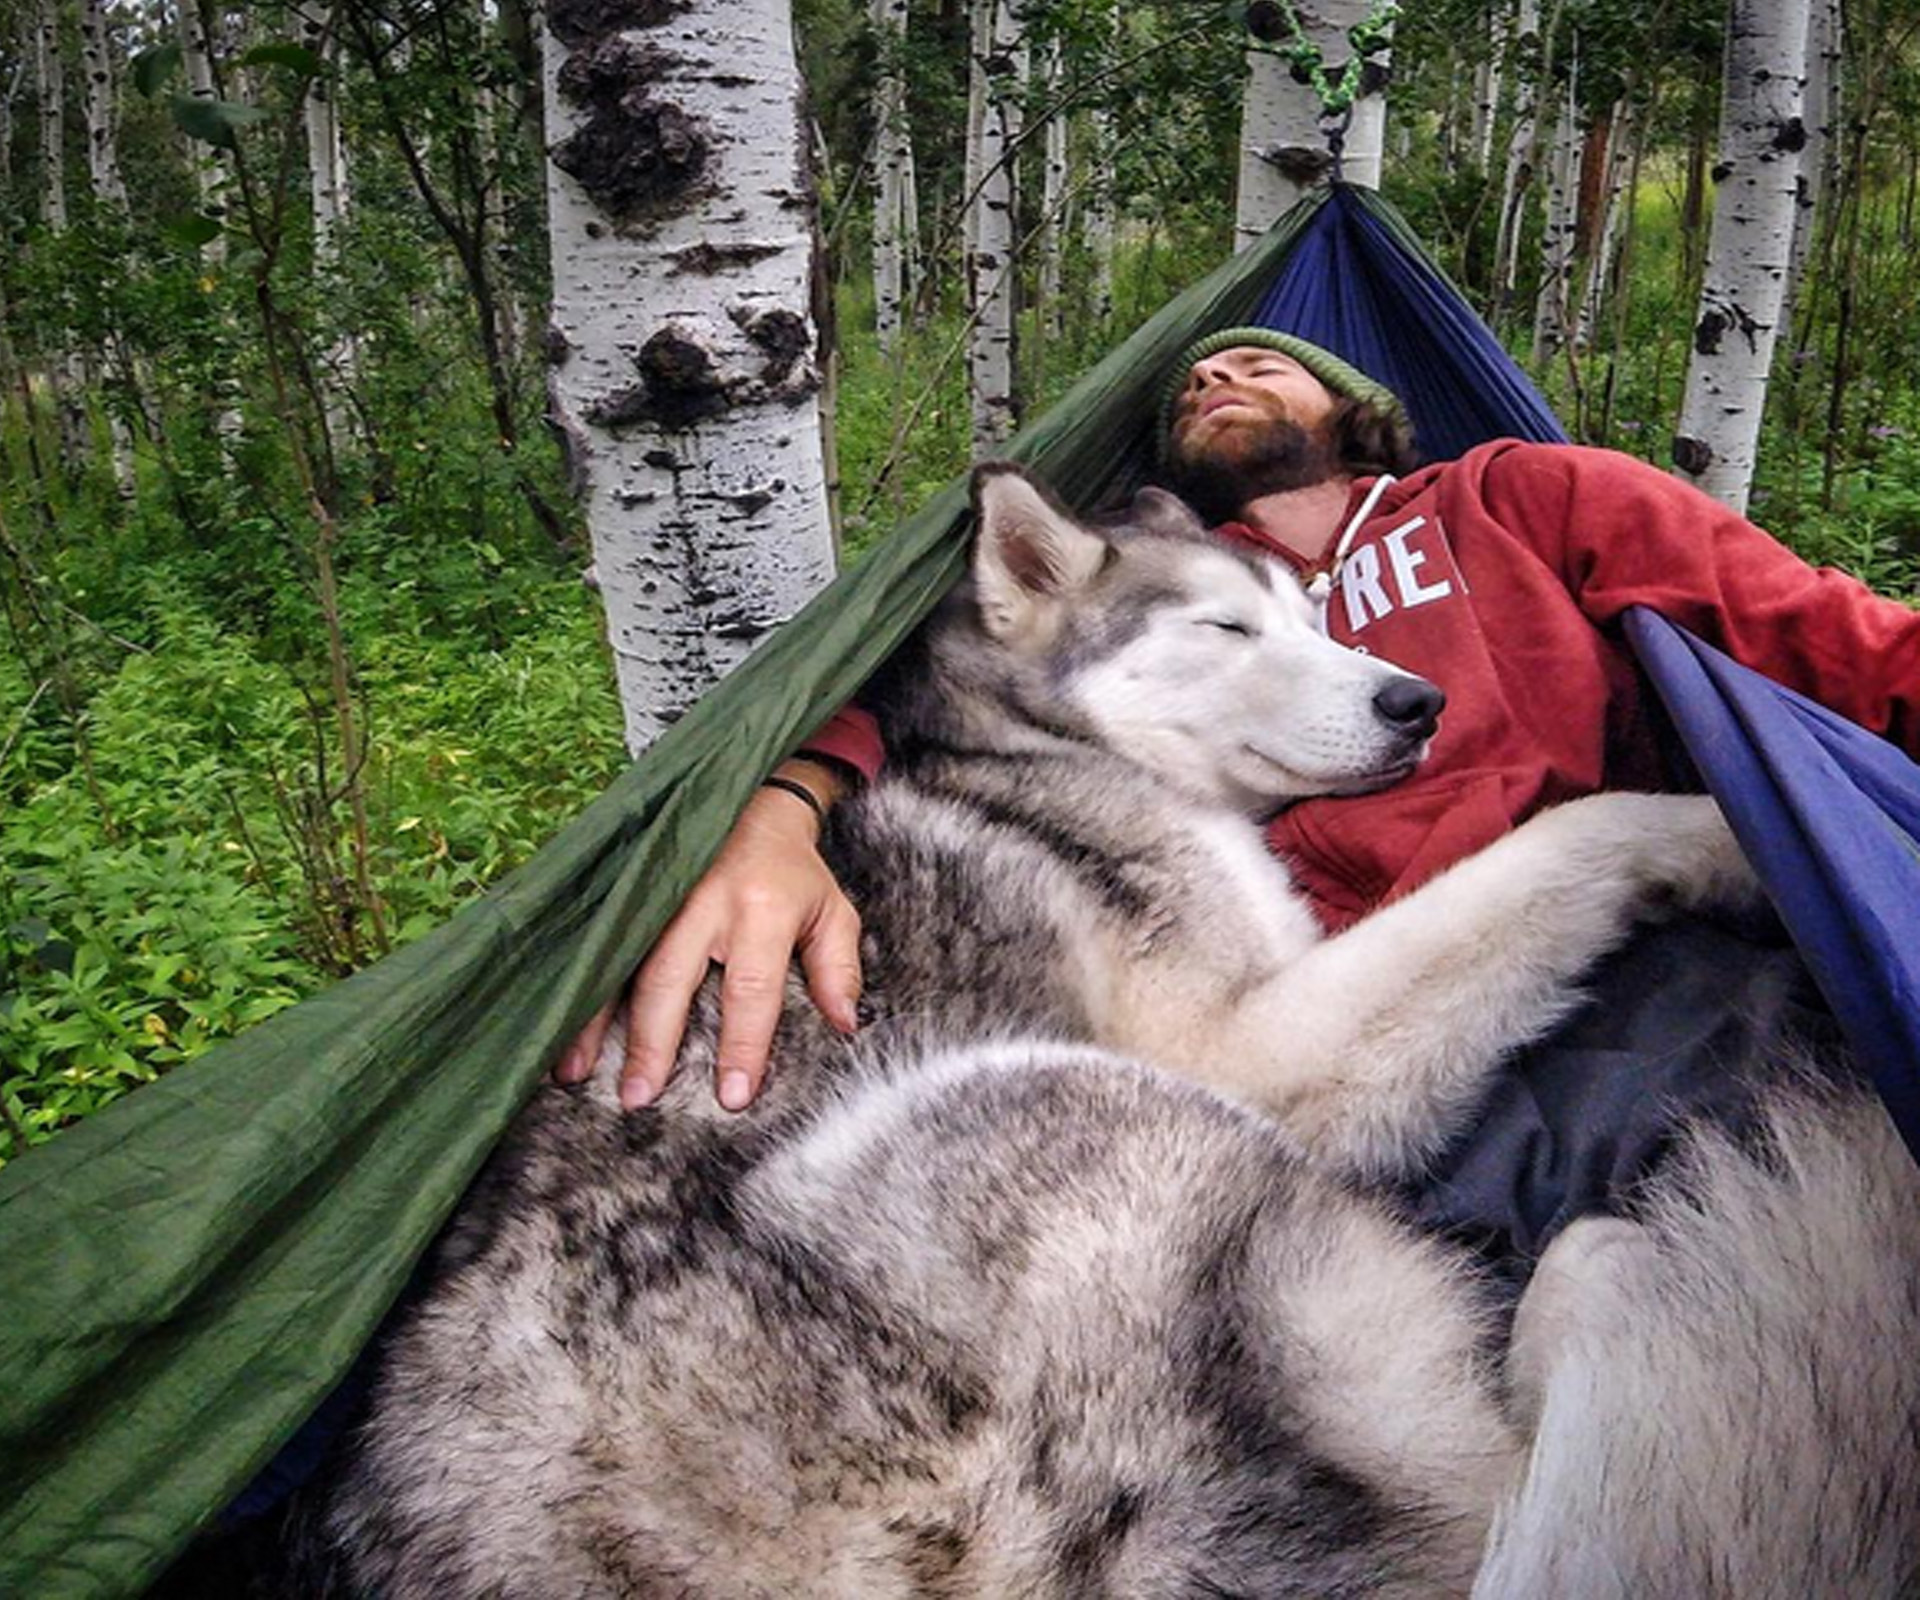 Let this wolfdog inspire your wanderlust